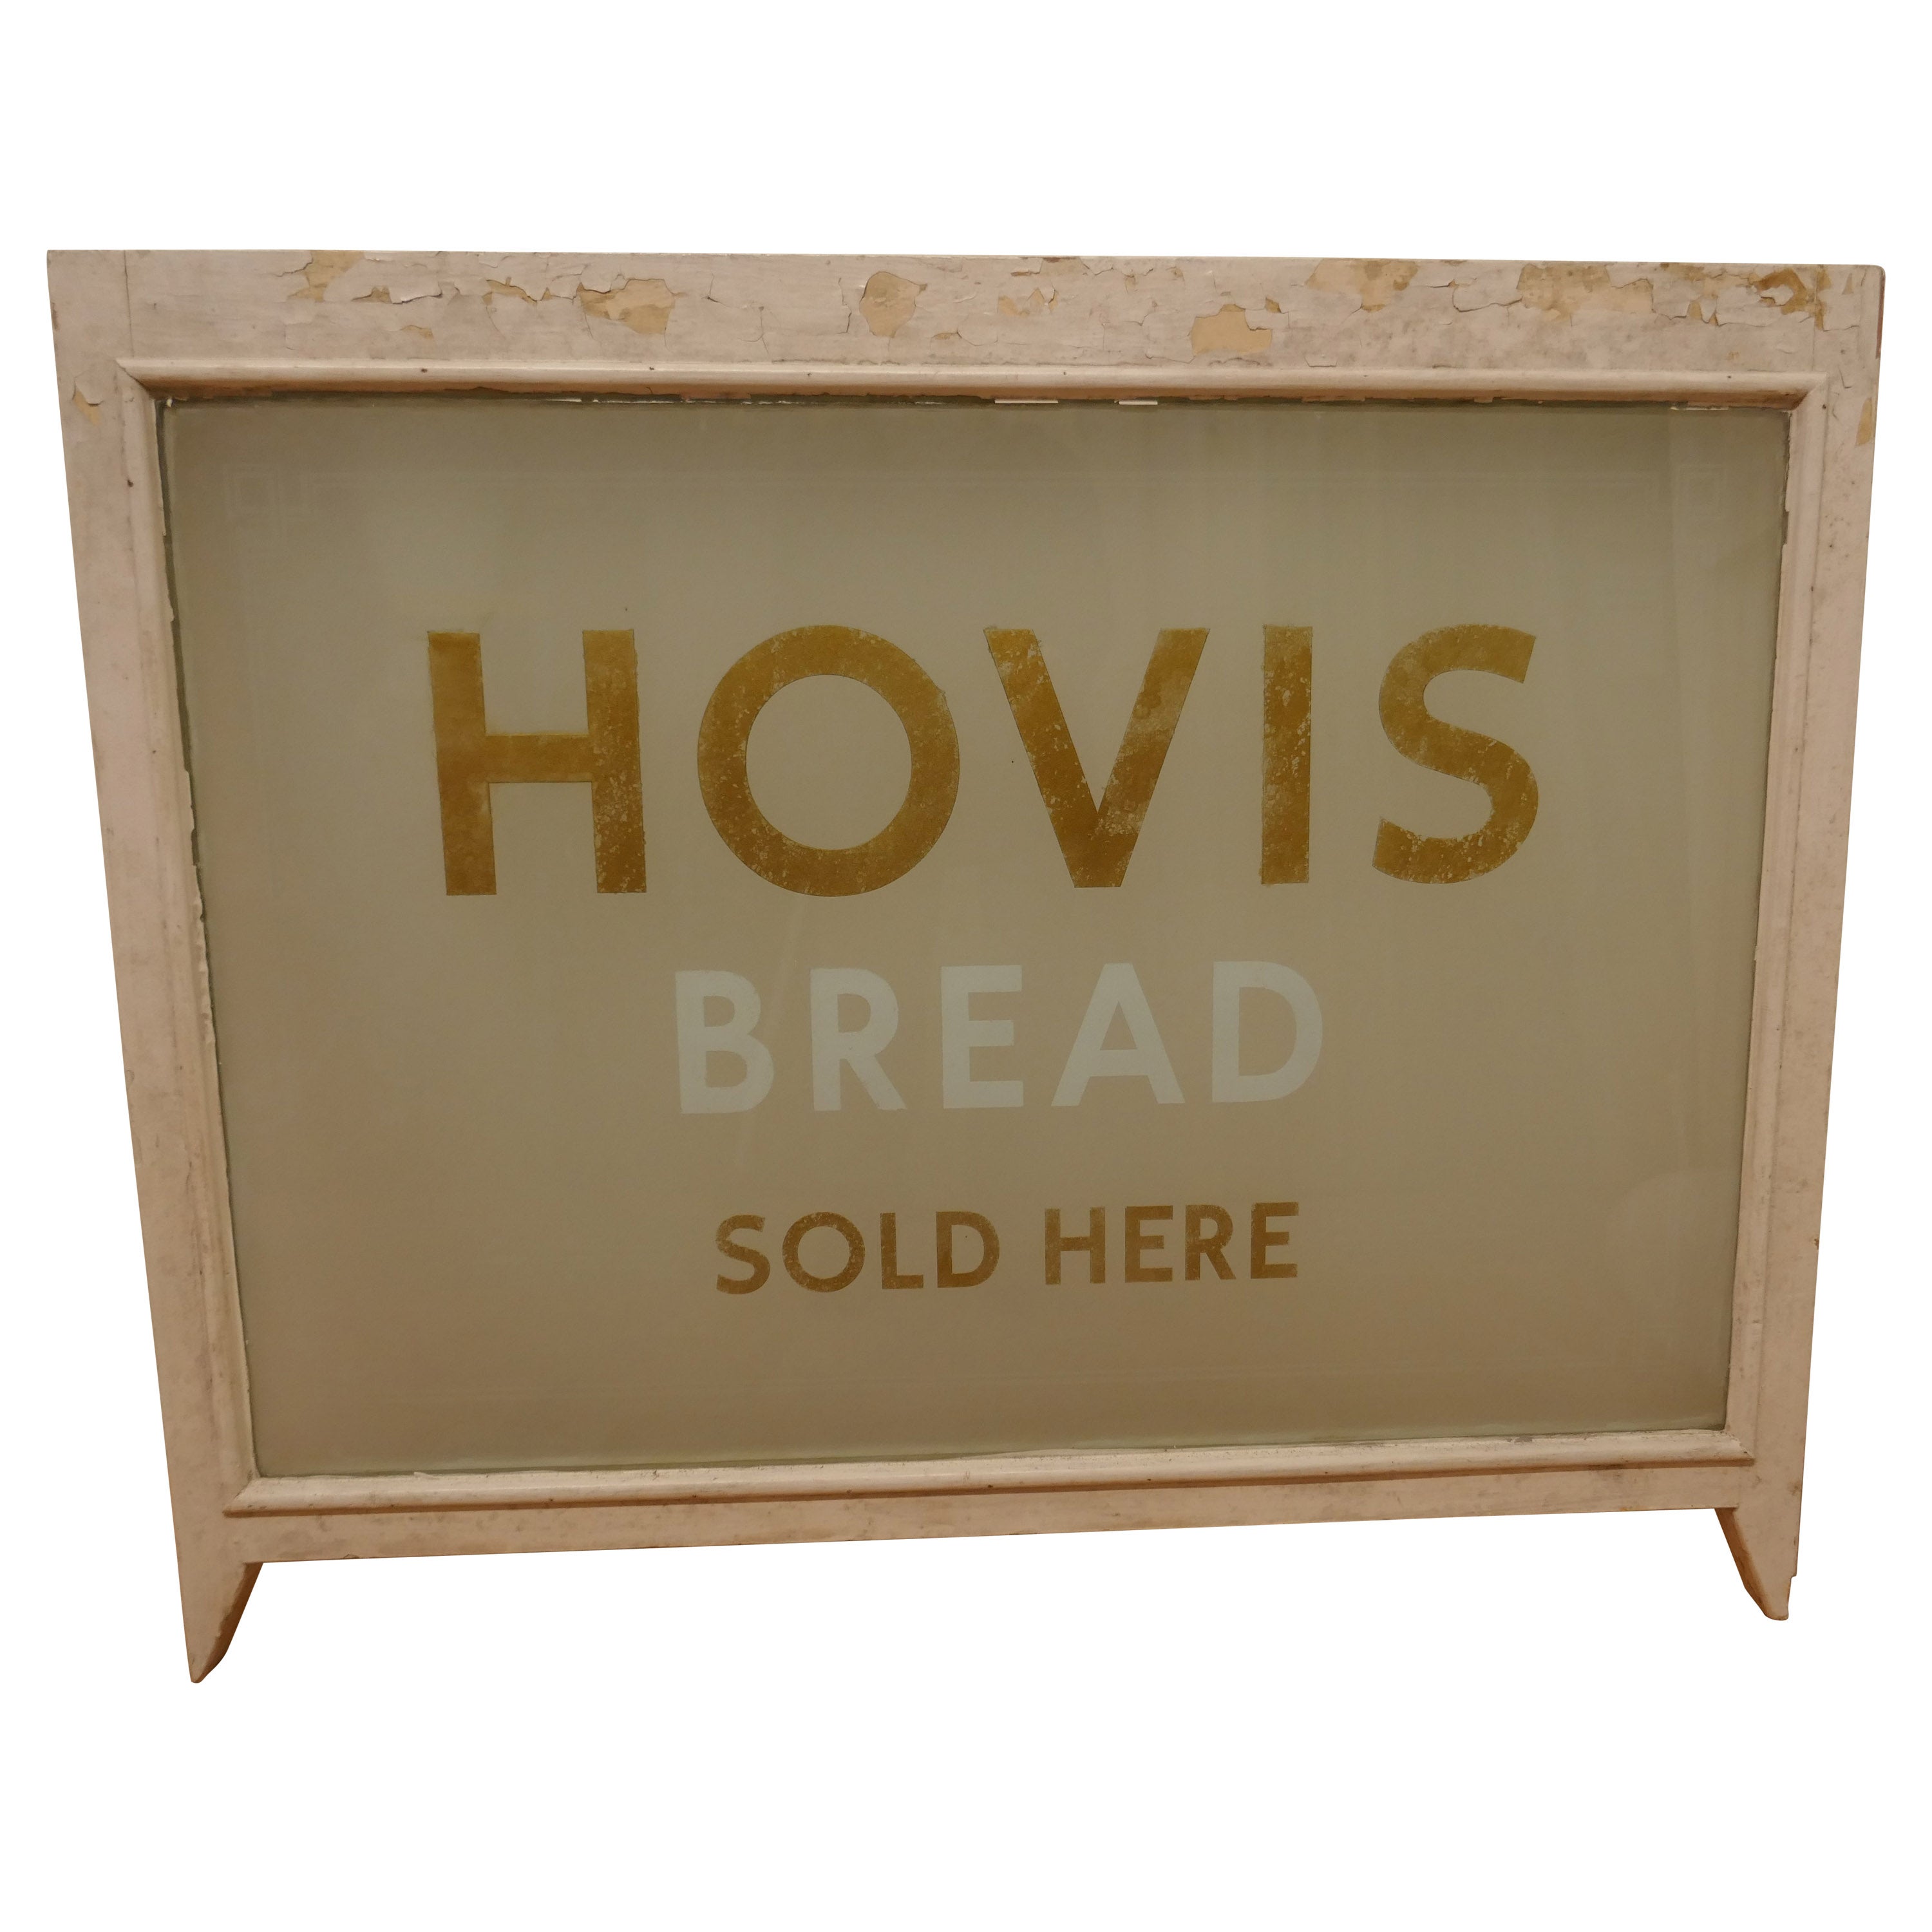 HOVIS, Etched Glass Bakery Advertising Window Sign